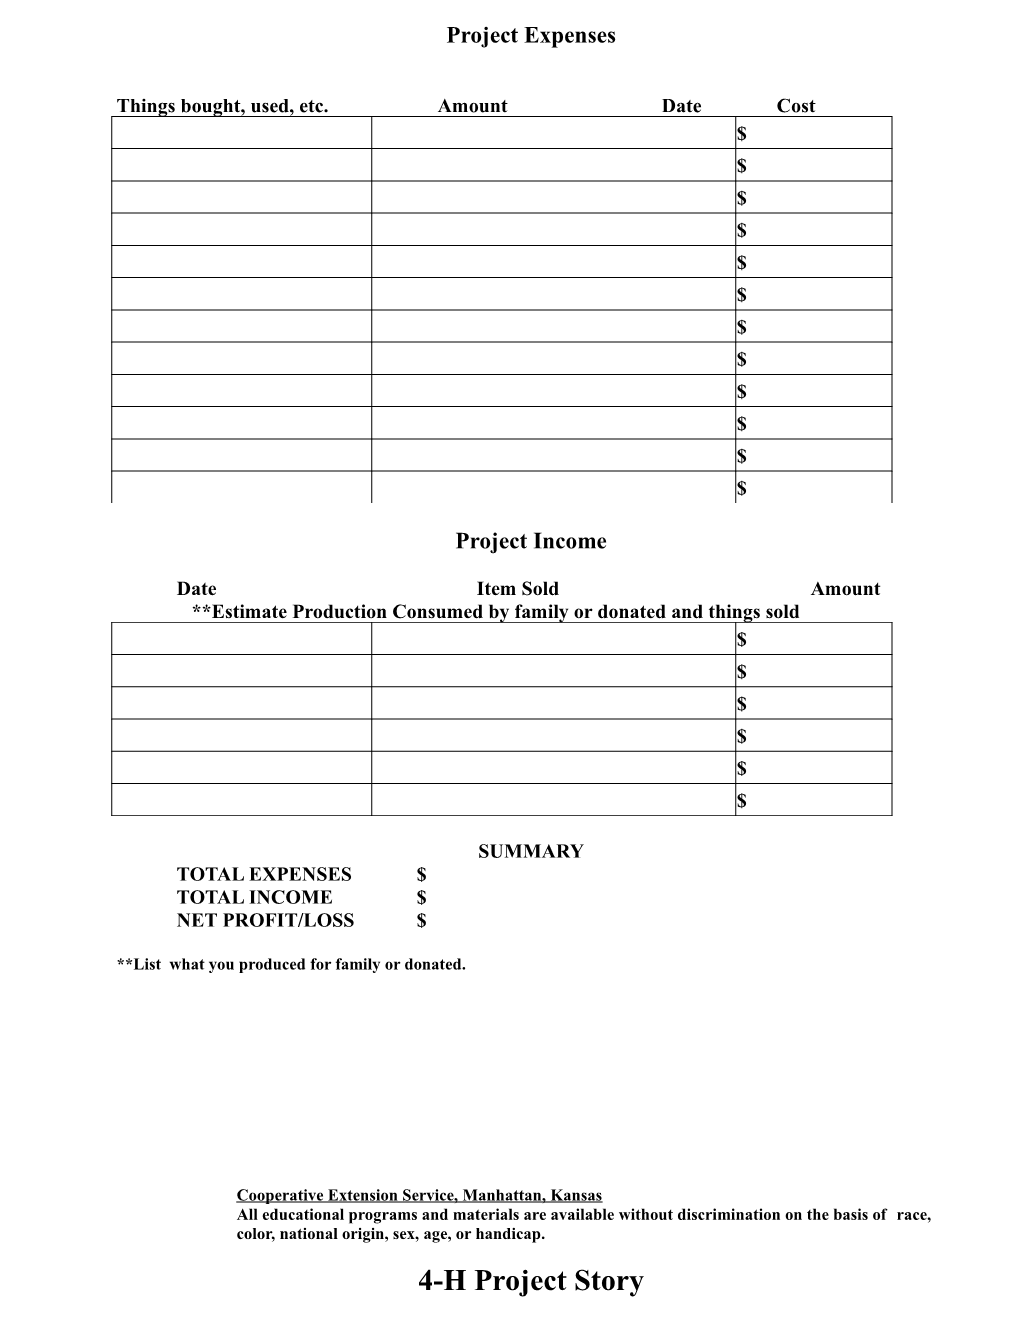 Stanton County 4-H Project Sheet